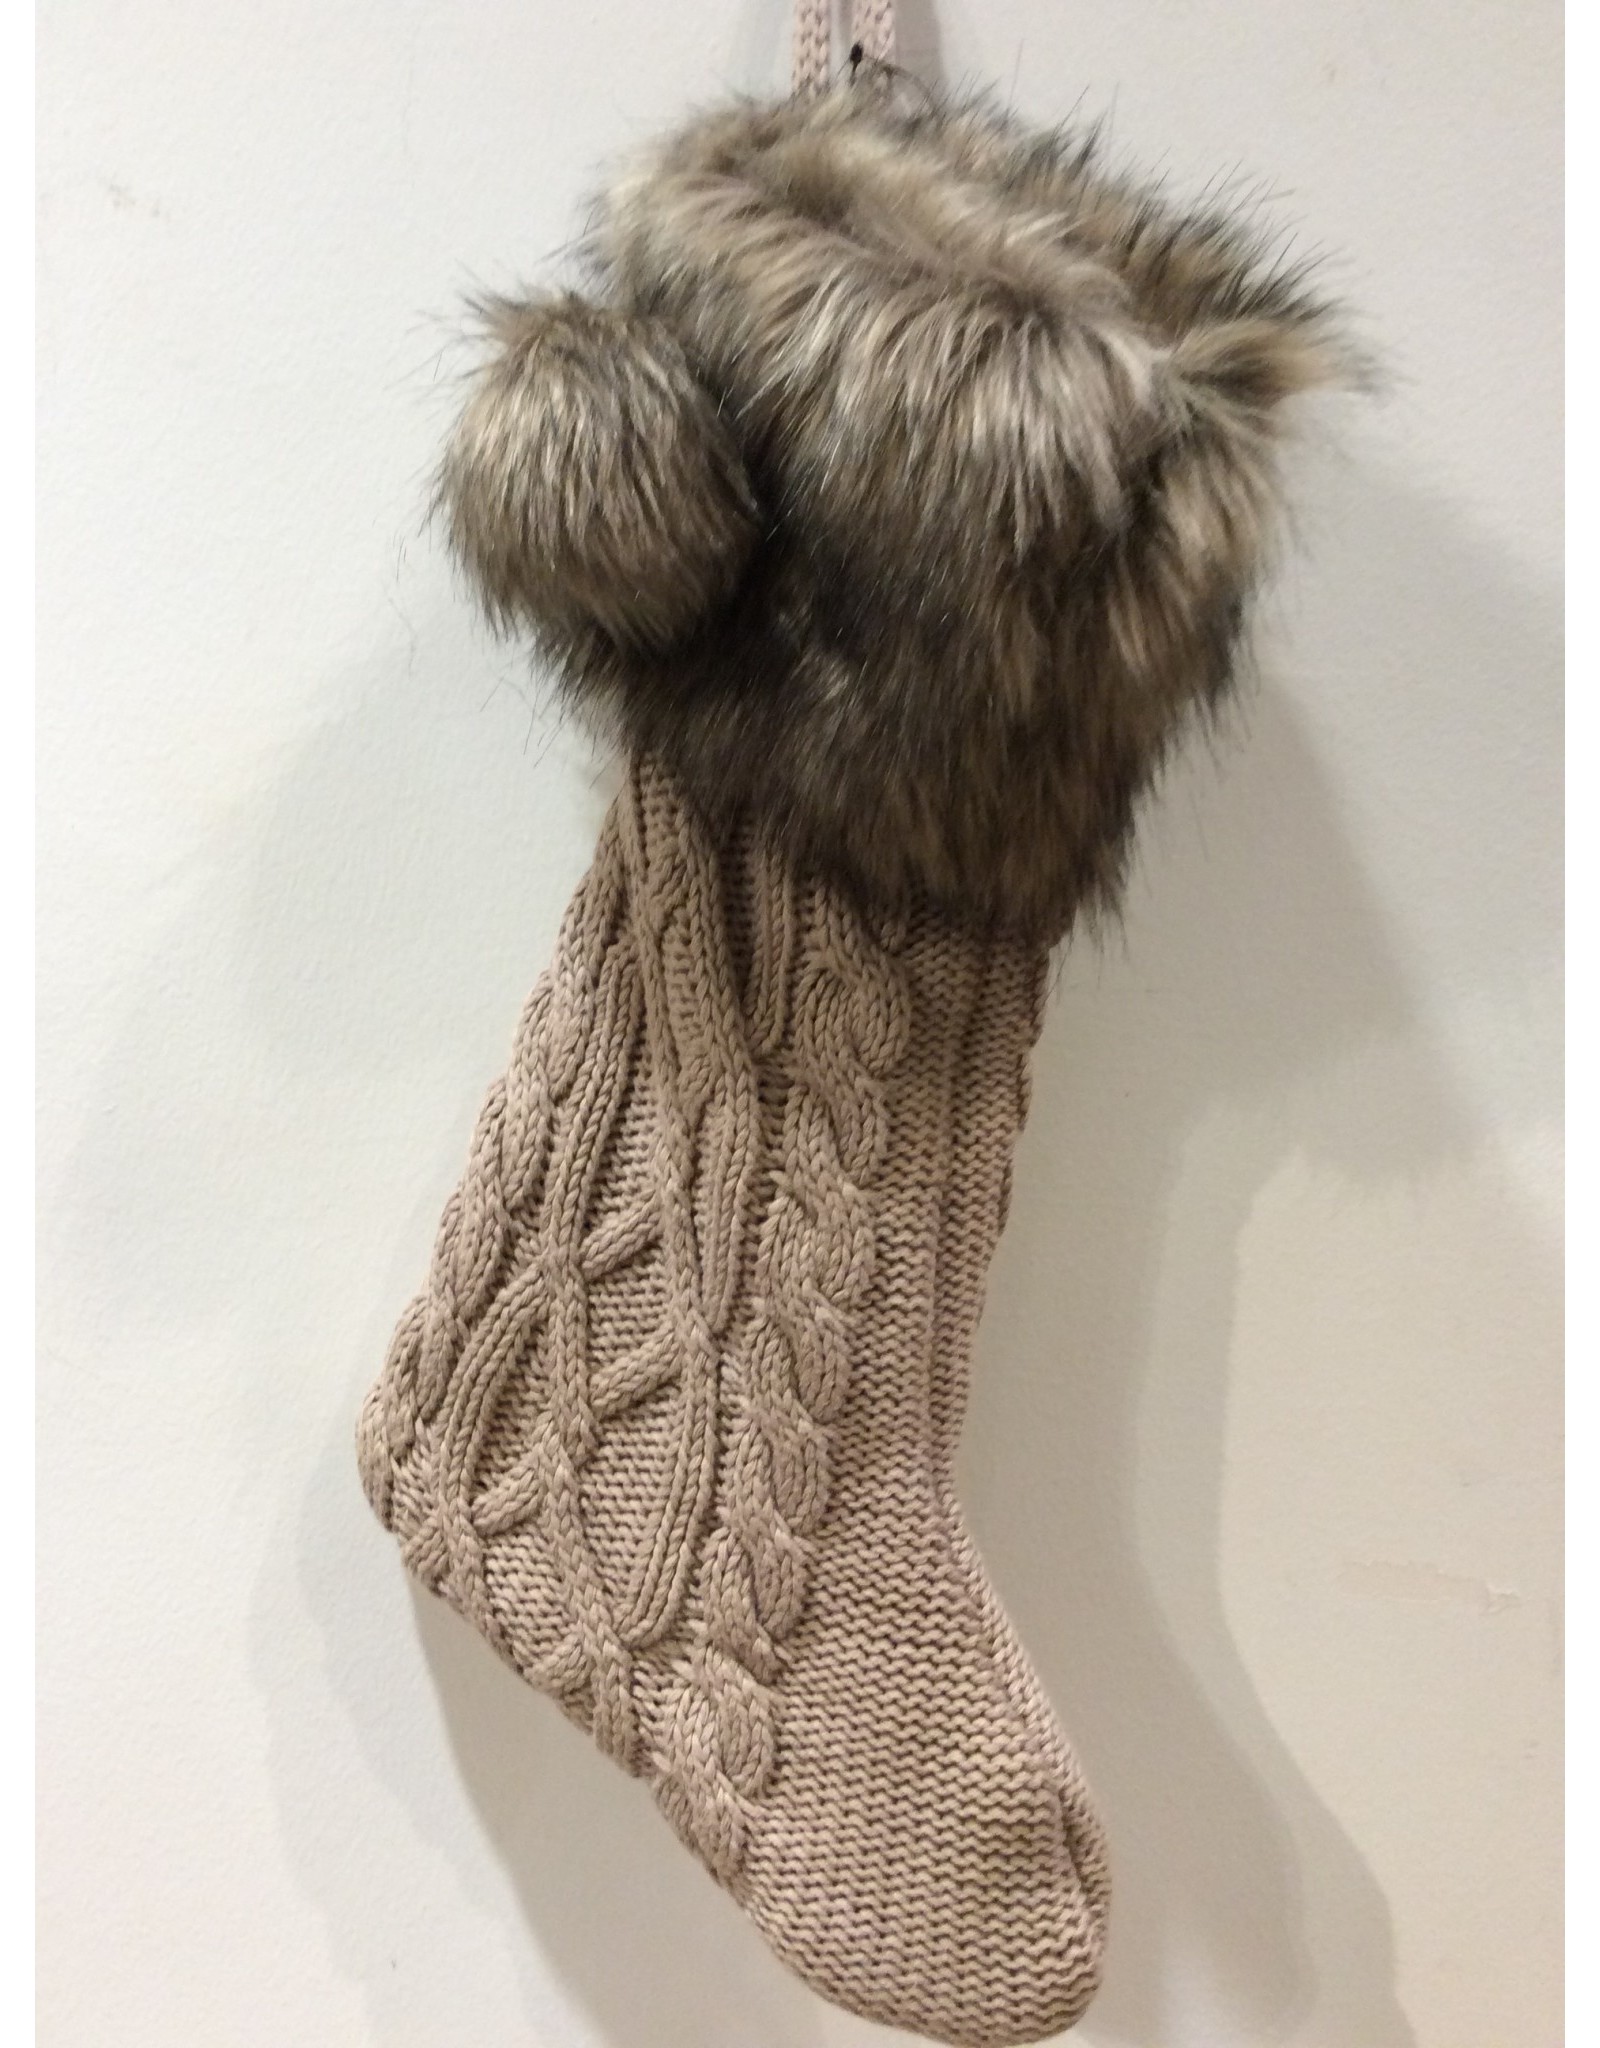 20"H Cotton Knit Stocking with Faux Fur Cuff and Pom Poms, Taupe Color